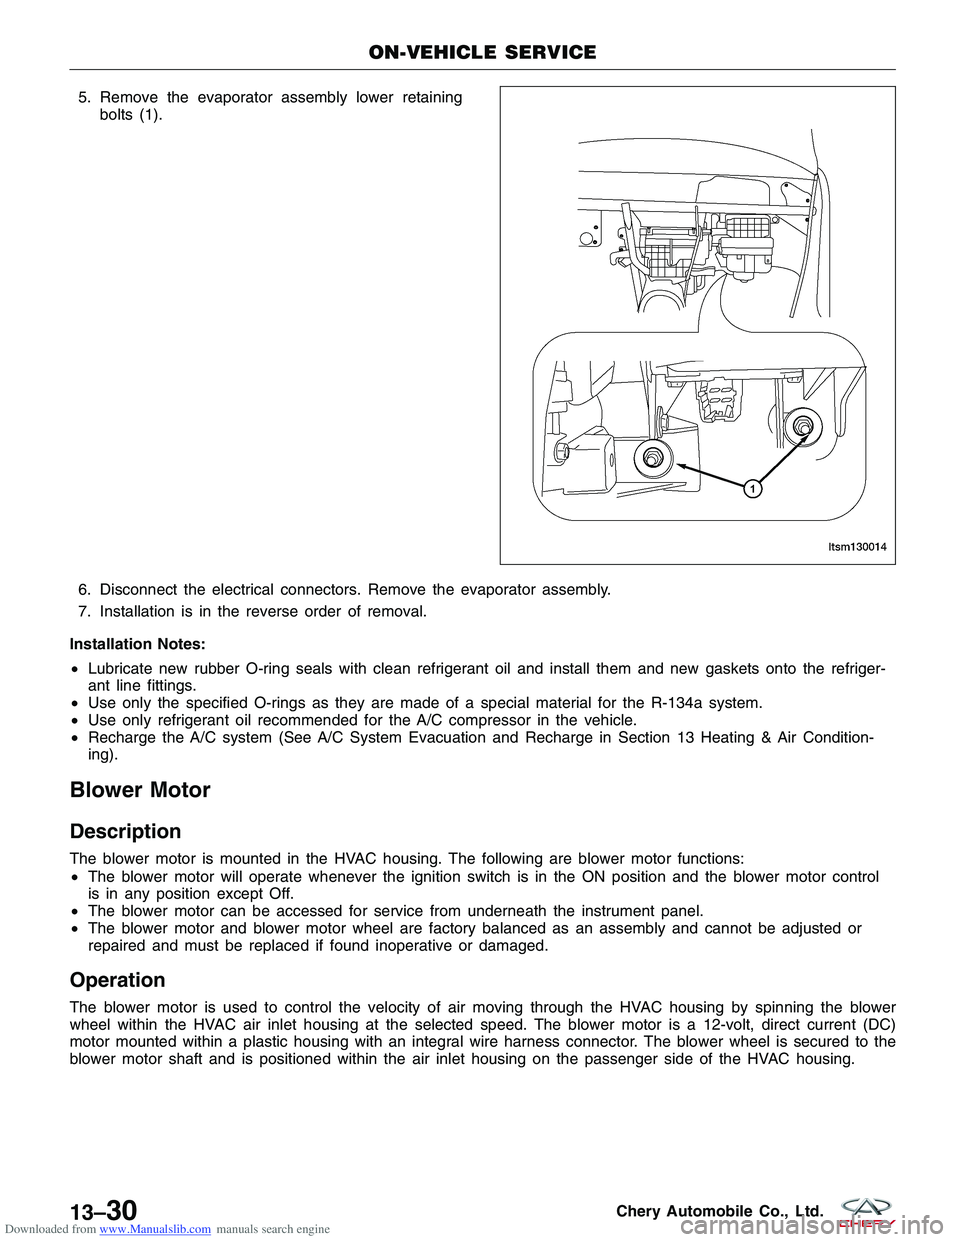 CHERY TIGGO 2009  Service Repair Manual Downloaded from www.Manualslib.com manuals search engine 5. Remove the evaporator assembly lower retainingbolts (1).
6. Disconnect the electrical connectors. Remove the evaporator assembly.
7. Install